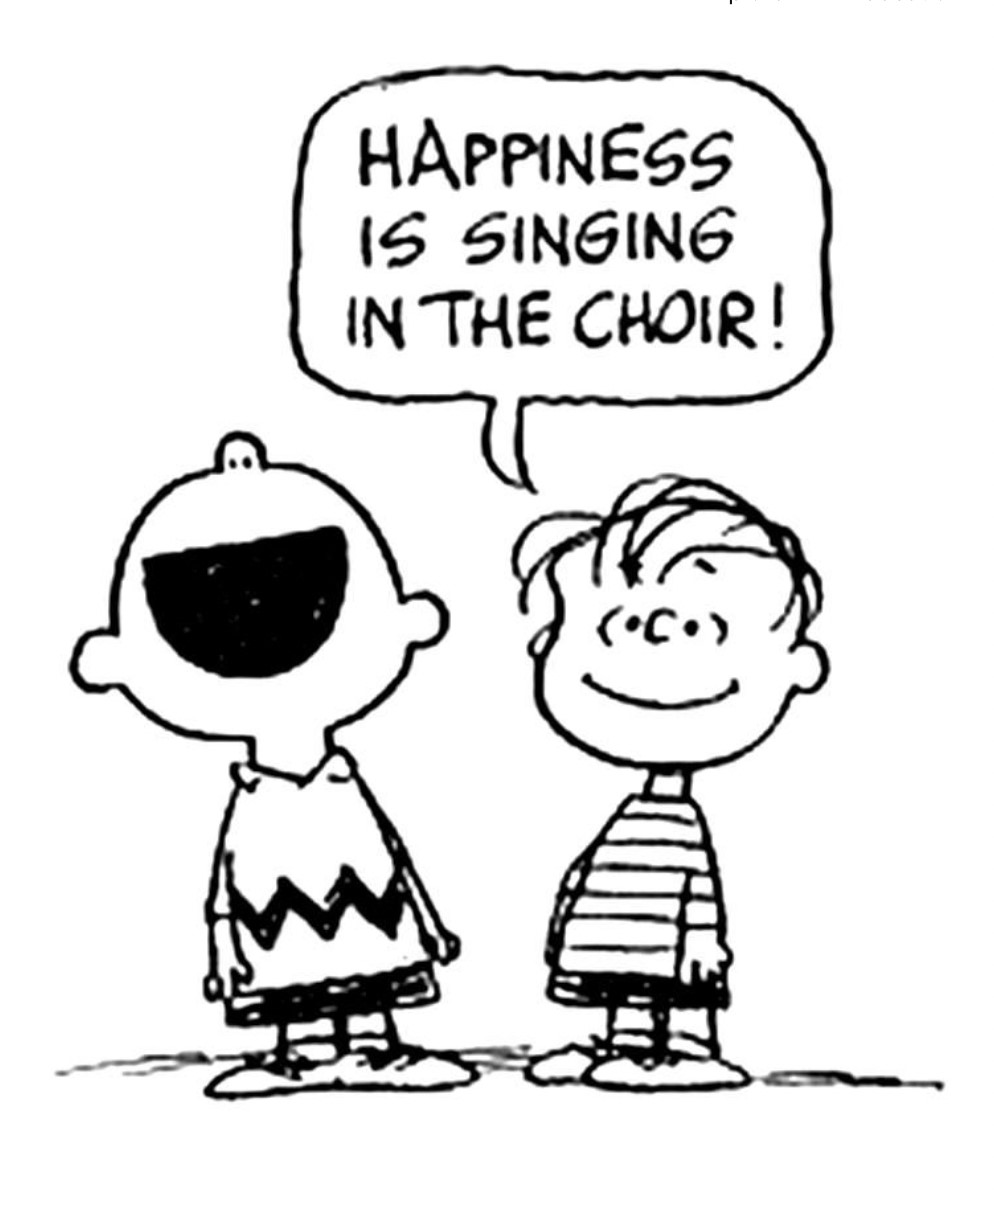 Happiness is singing in a choir